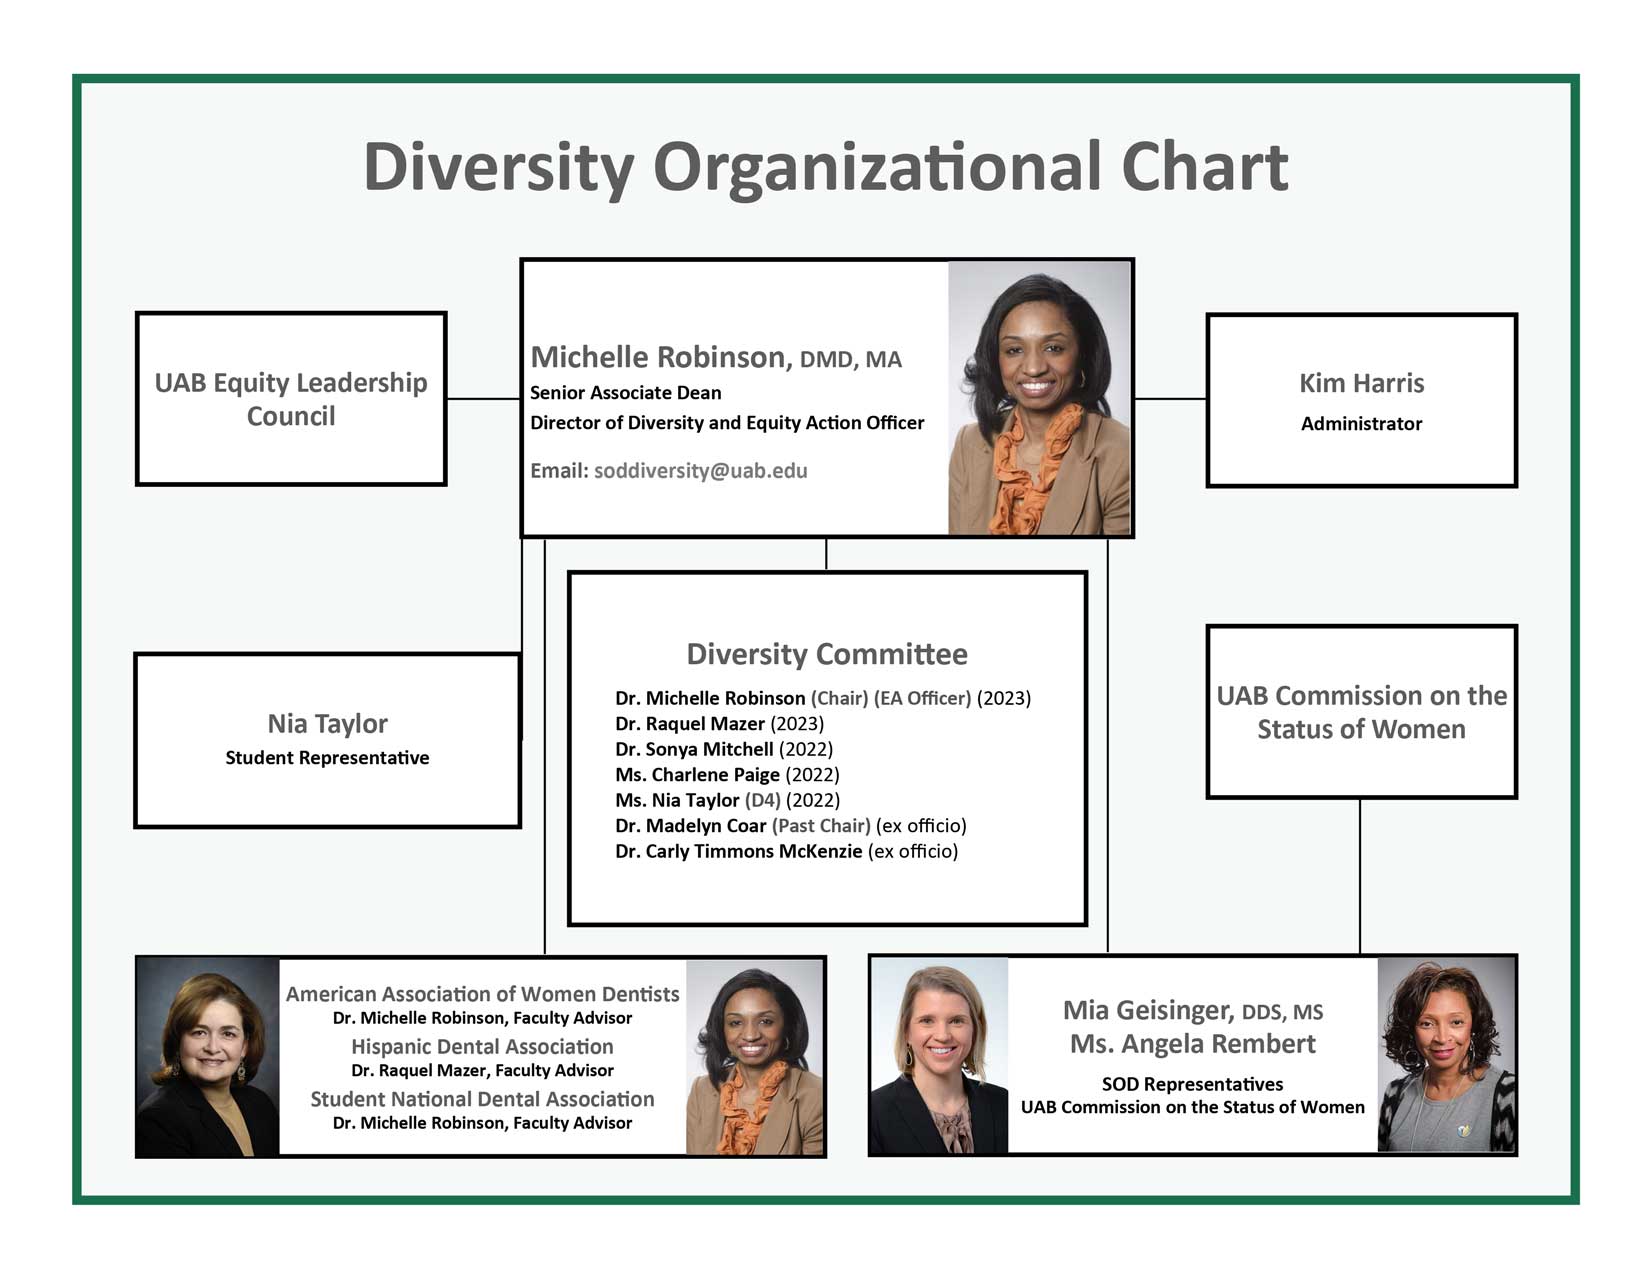 Diversity Organizational Chart - follow link for accessible text.